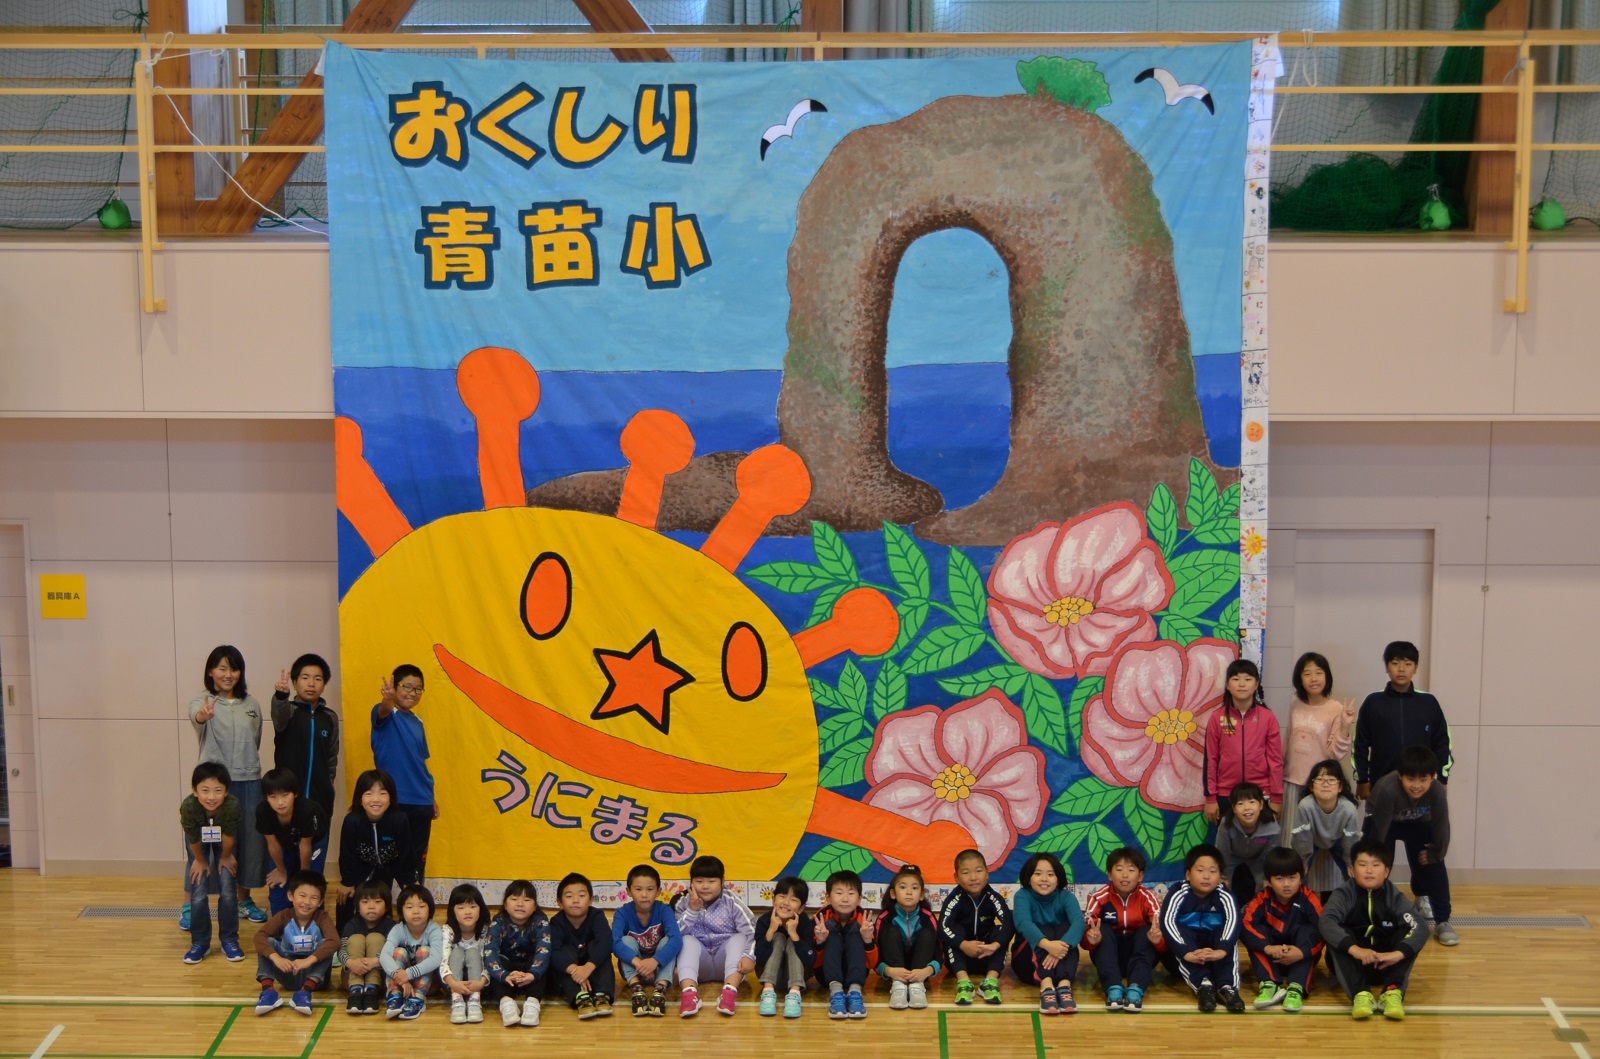 The Biggest Painting in the World 2020 Okushiri town was completed